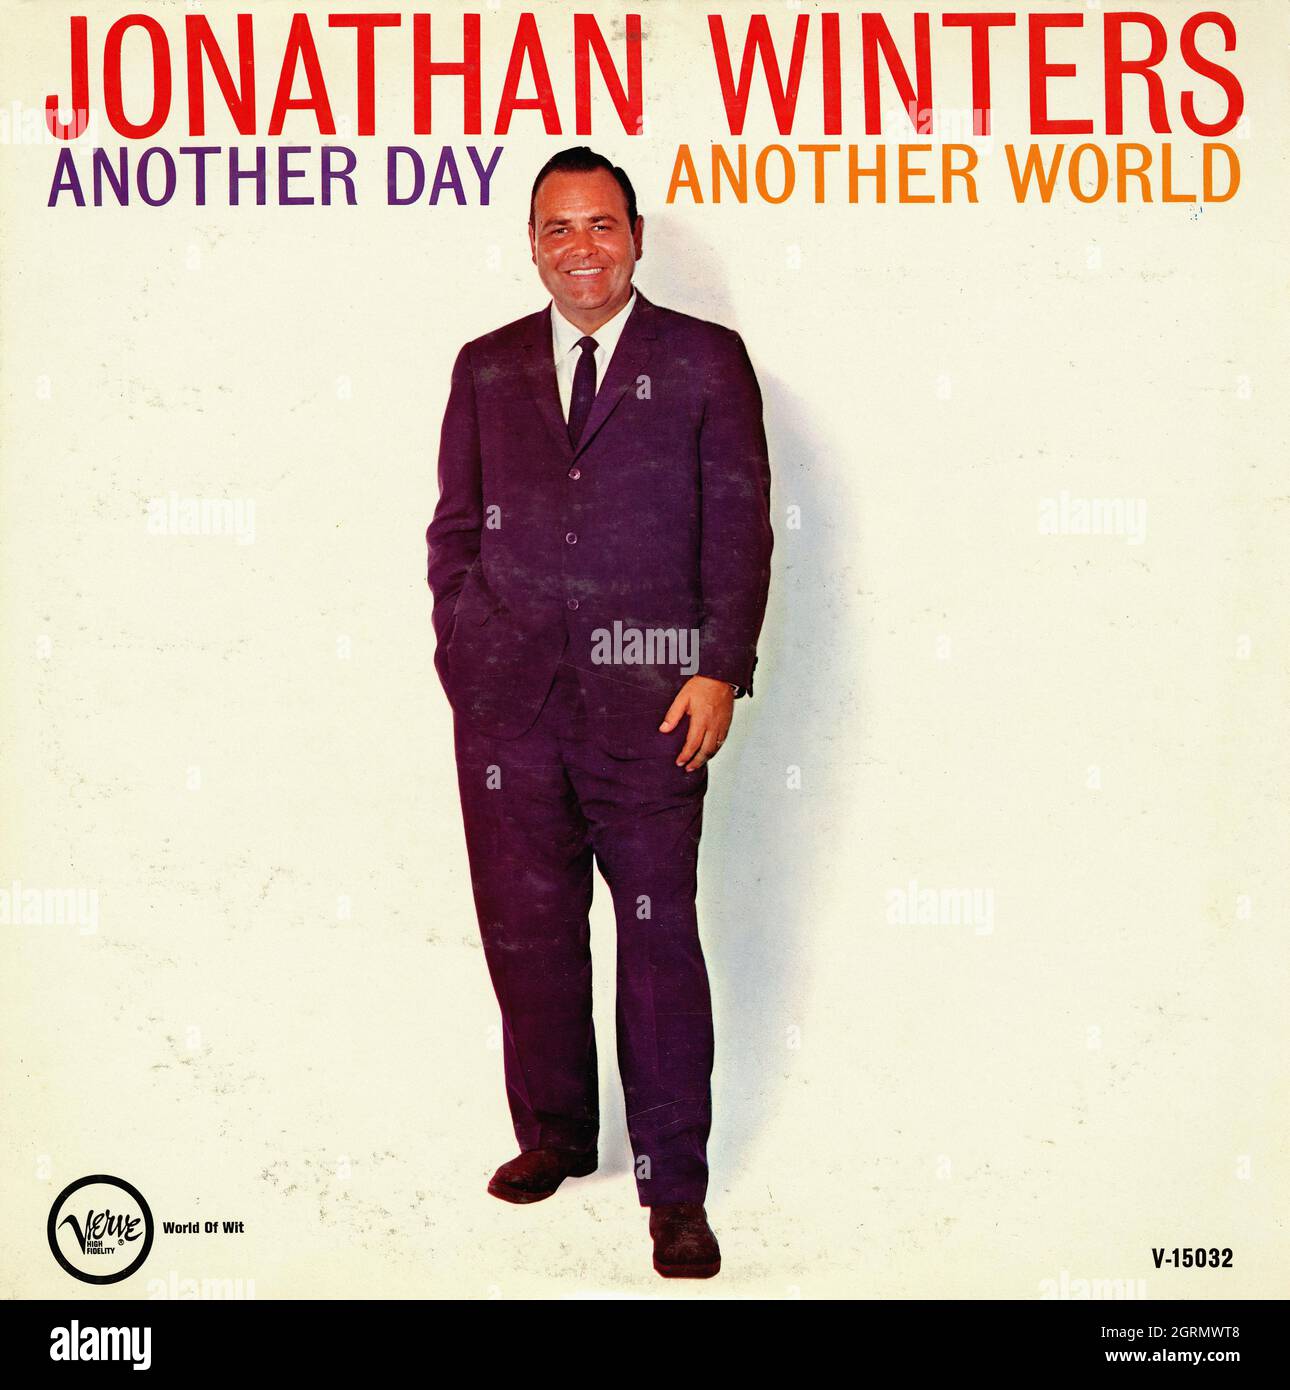 Jonathan Winters Another Day Another World -  Vintage American Comedy Vinyl Album Stock Photo